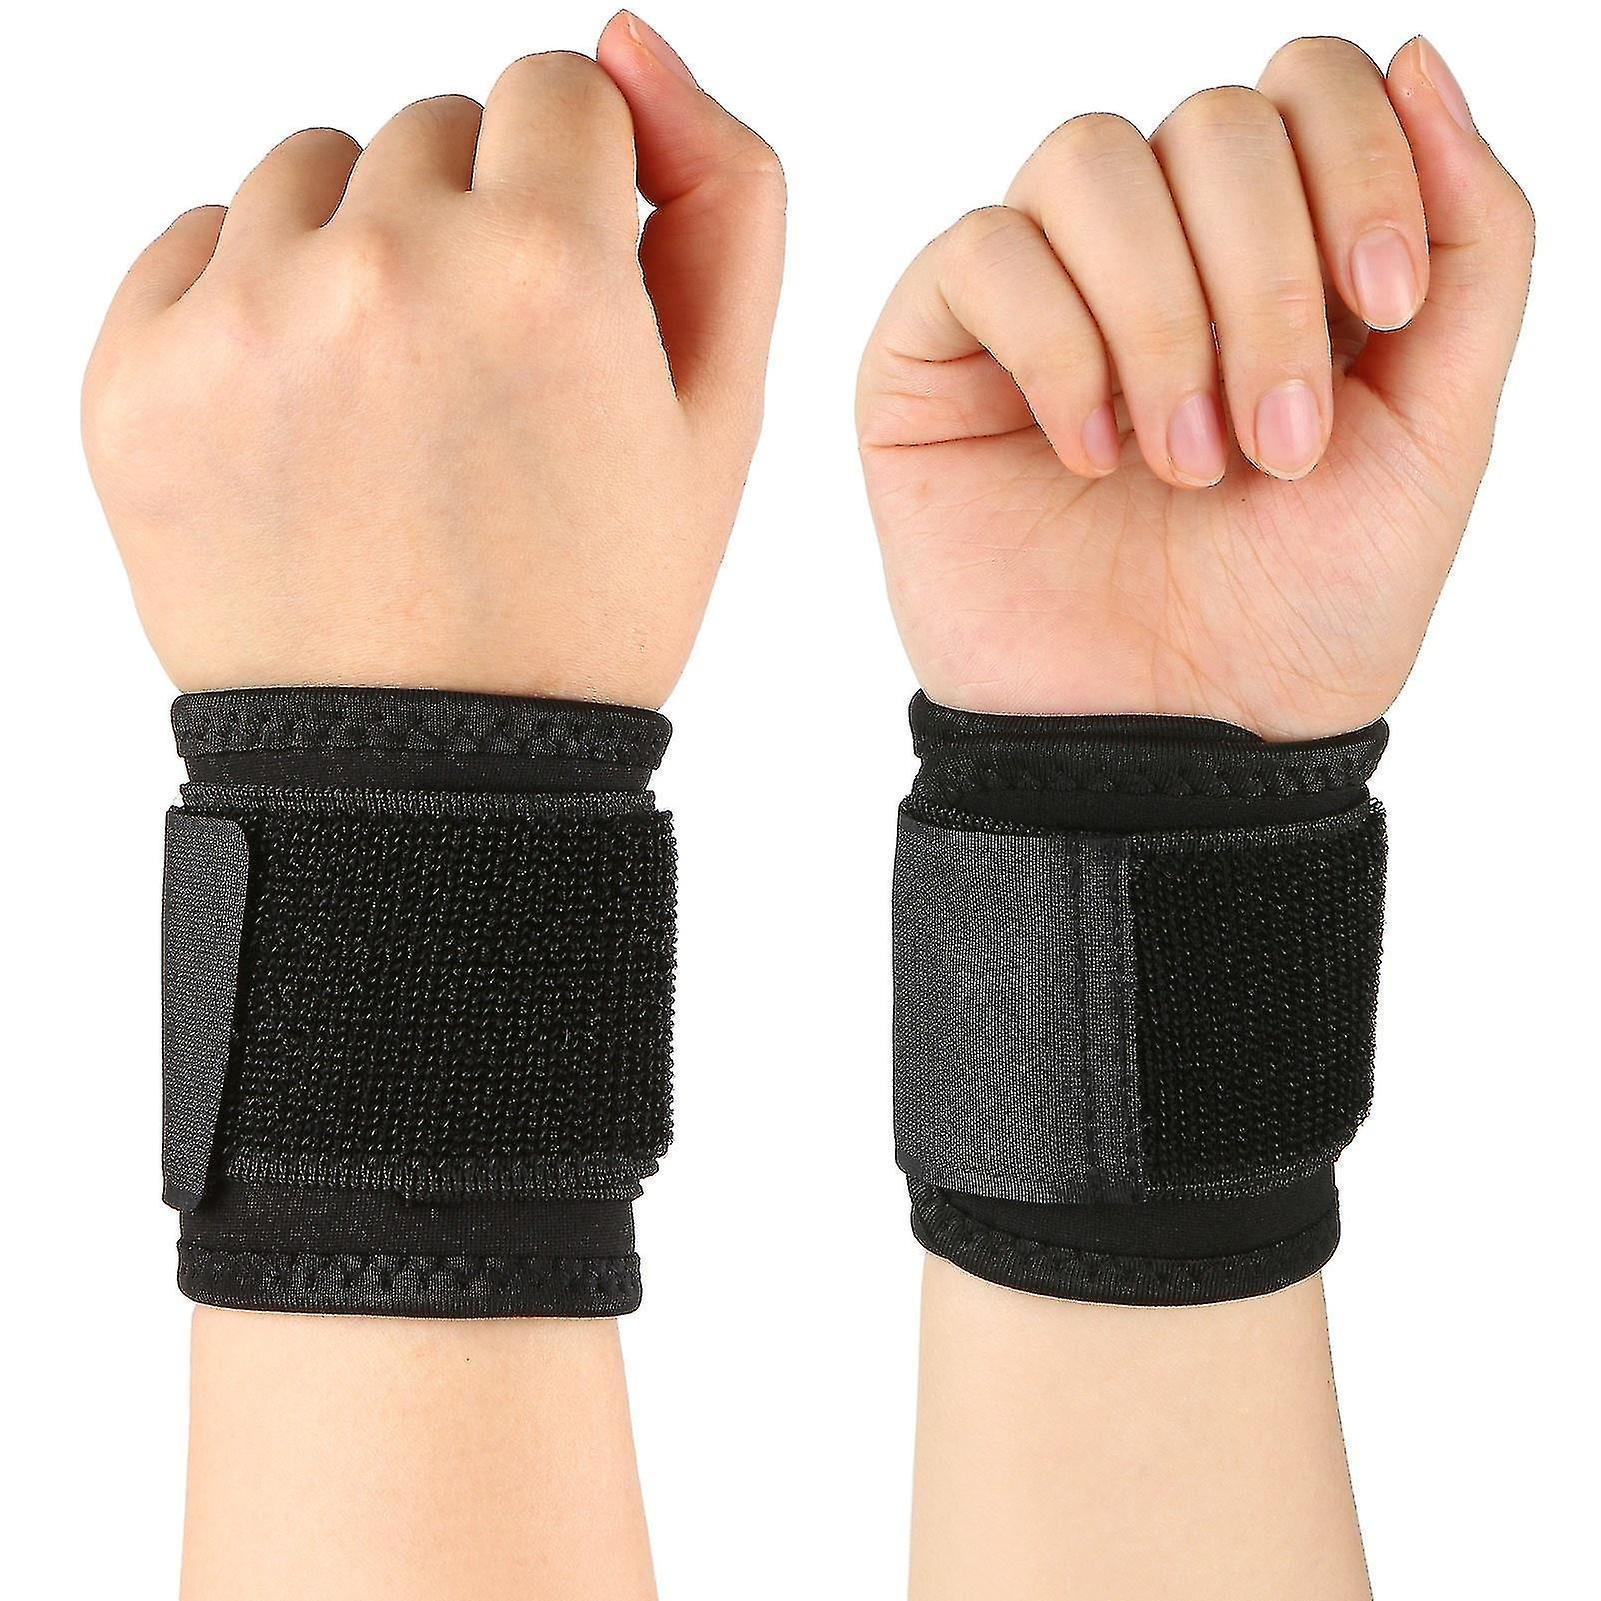 2pcs Wrist Support Brace Wrist Stabilizer Adjustable Wrist Bandages Protector Left And Right Hand Wrist Wraps For Fitness Office Pain Relief